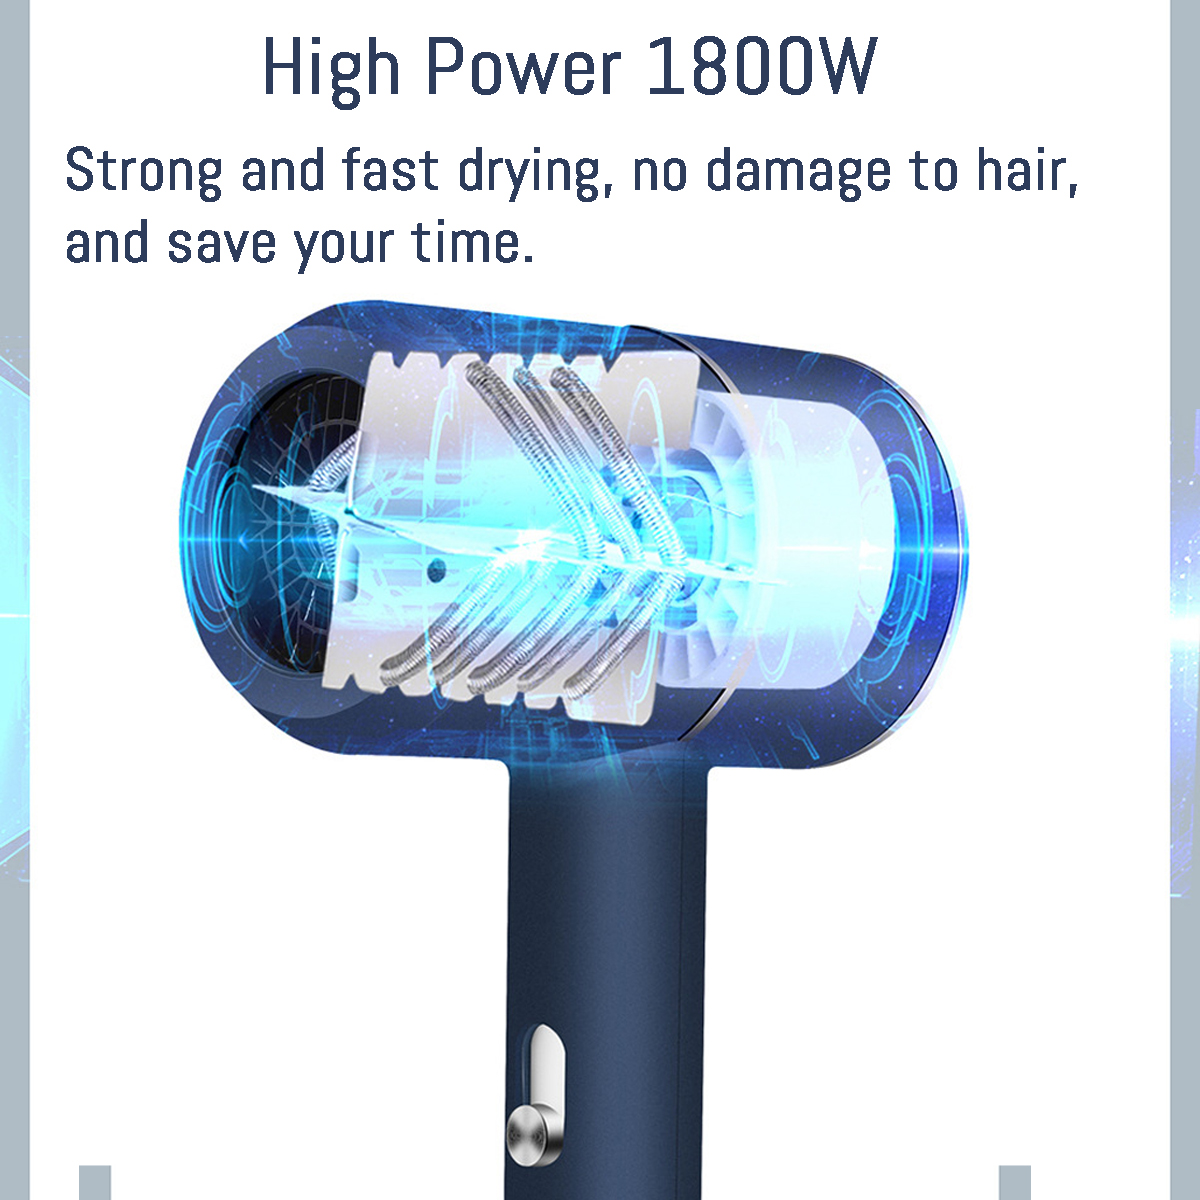 1800W-220V-Professional-Hairdressing-Salon-Electric-Hair-Dryer-3-Speed-Adjustable-Uniform-Quick-dry--1806218-3